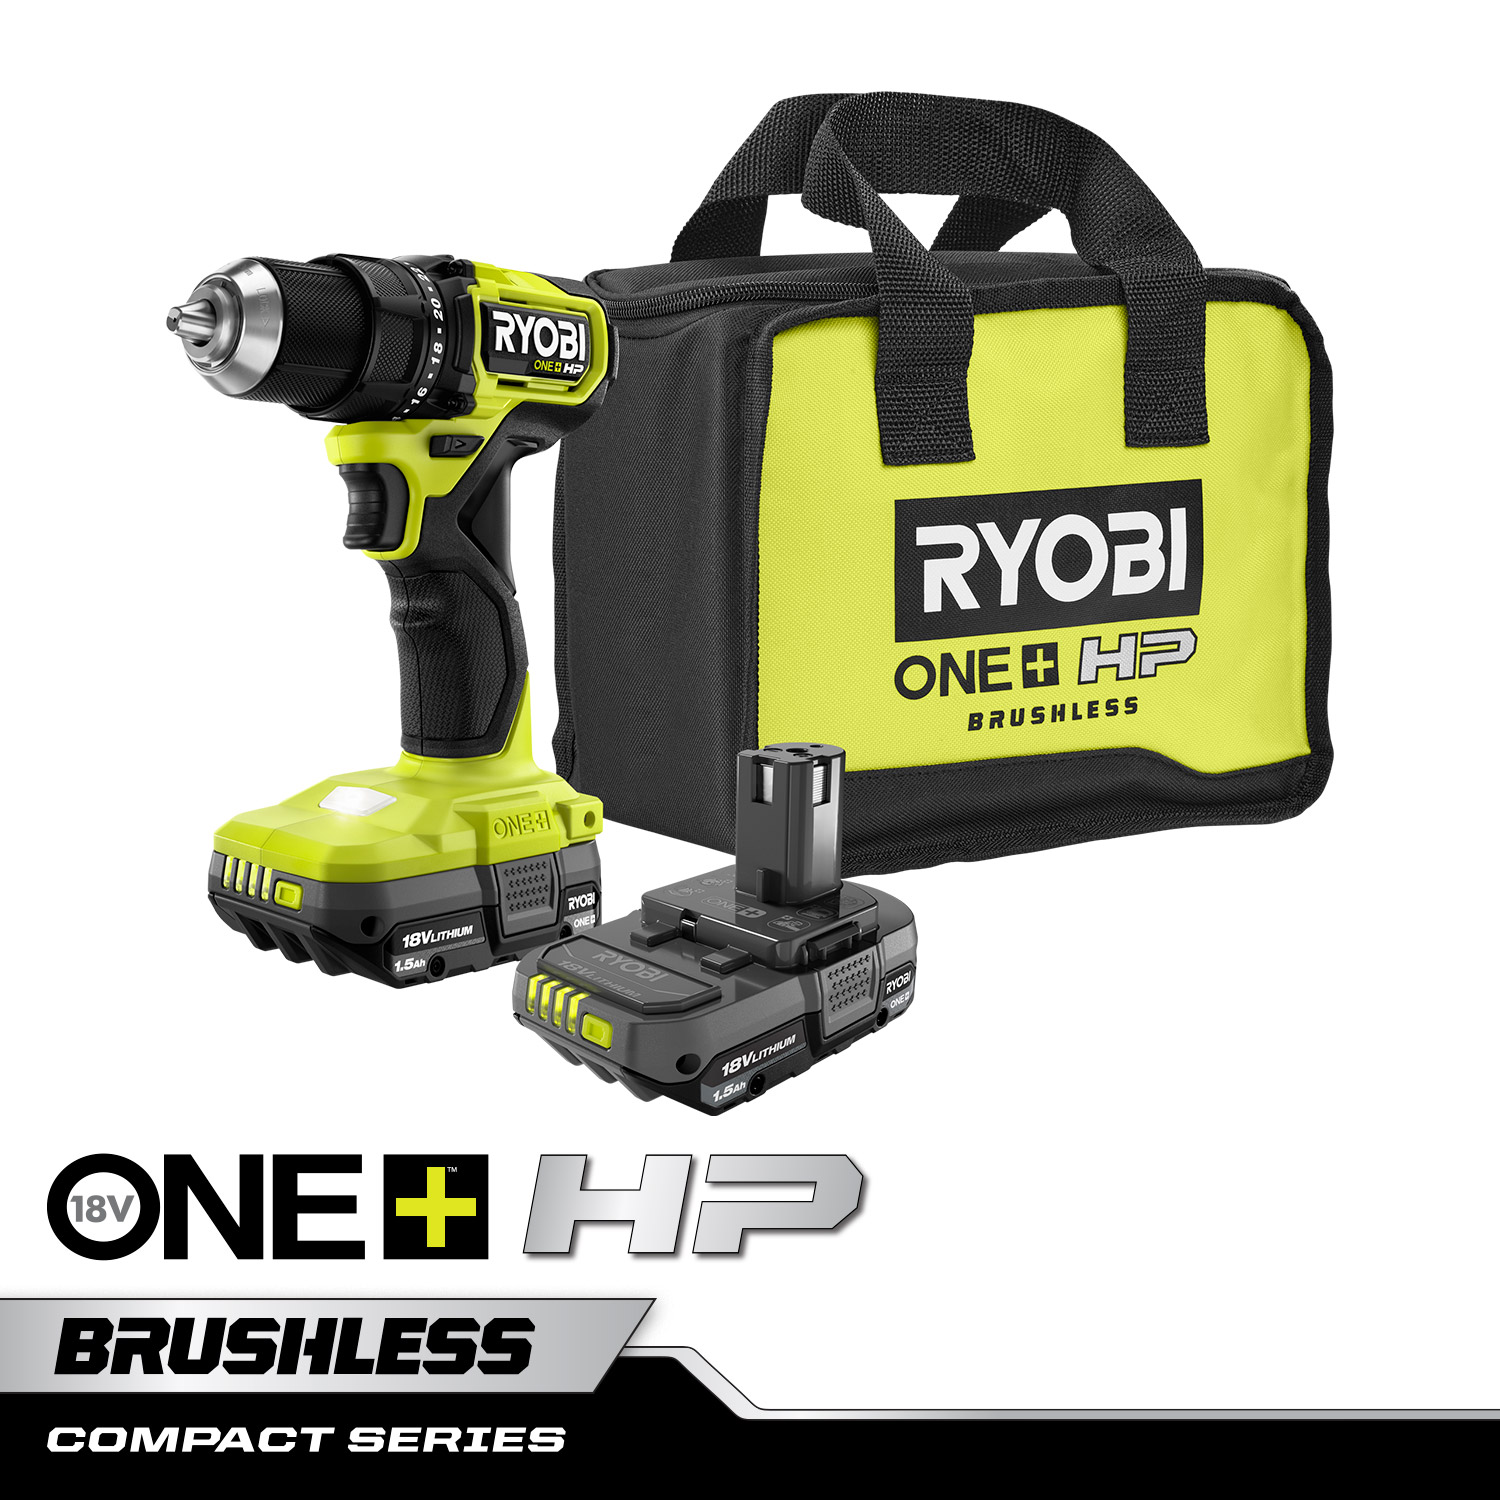 18V ONE+ HP COMPACT BRUSHLESS 1/2" DRILL/DRIVER KIT